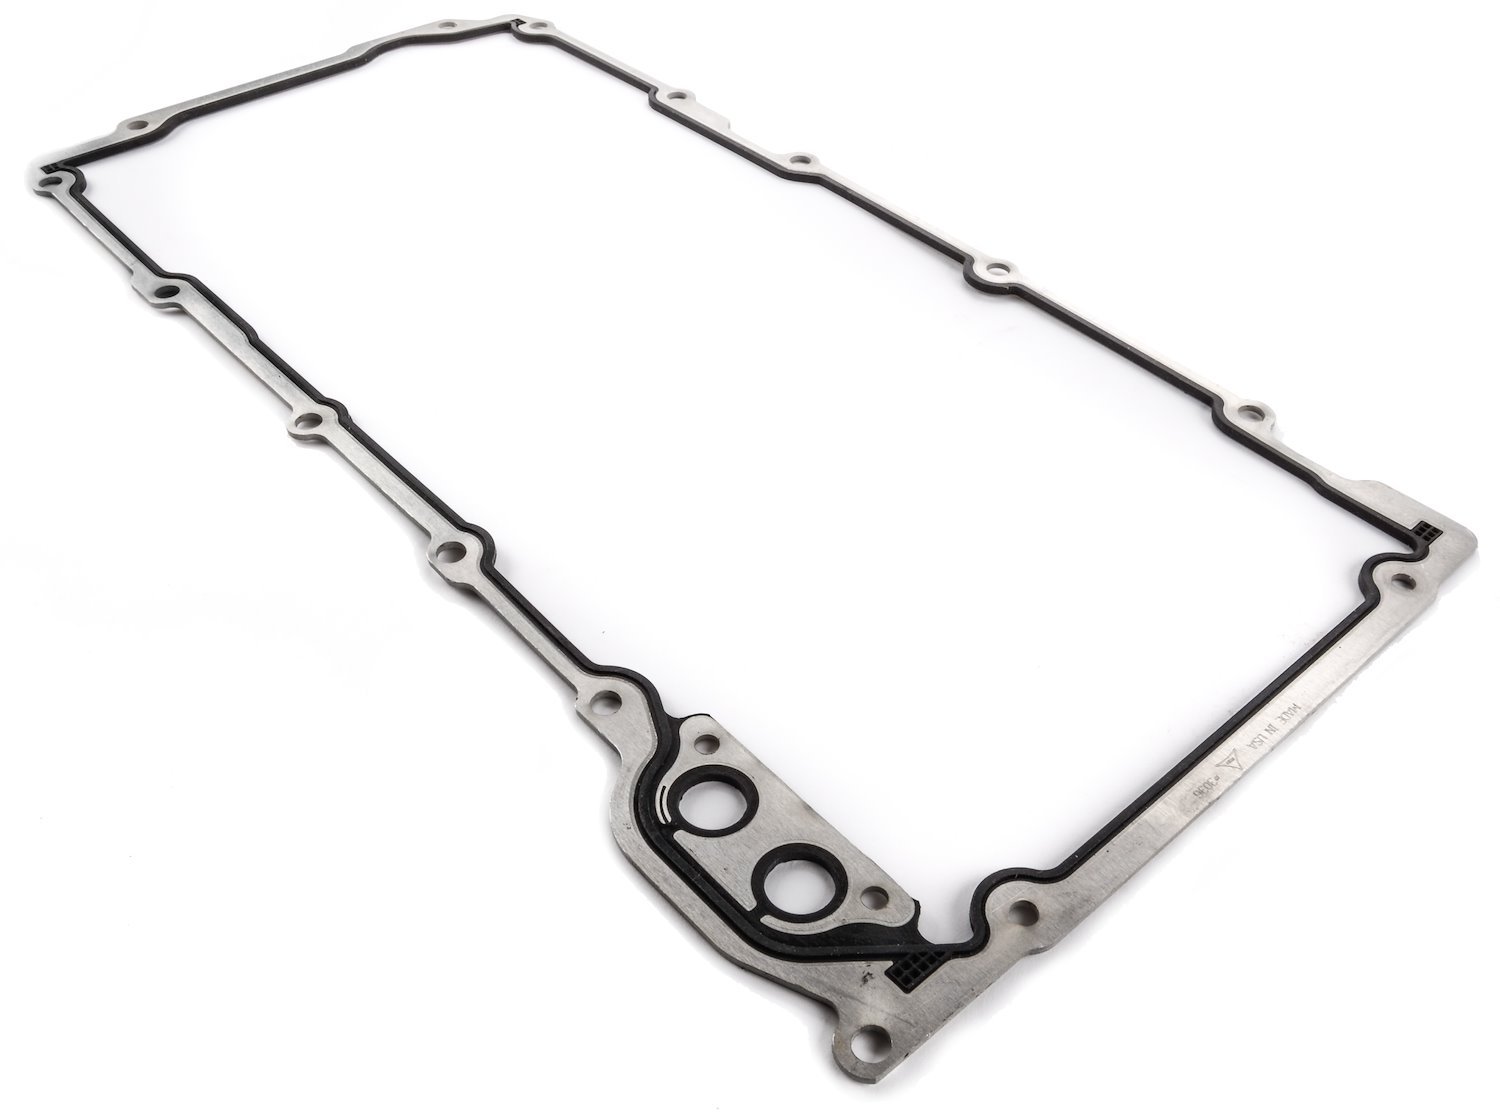 One-Piece Oil Pan Gasket for LS-Series Engines